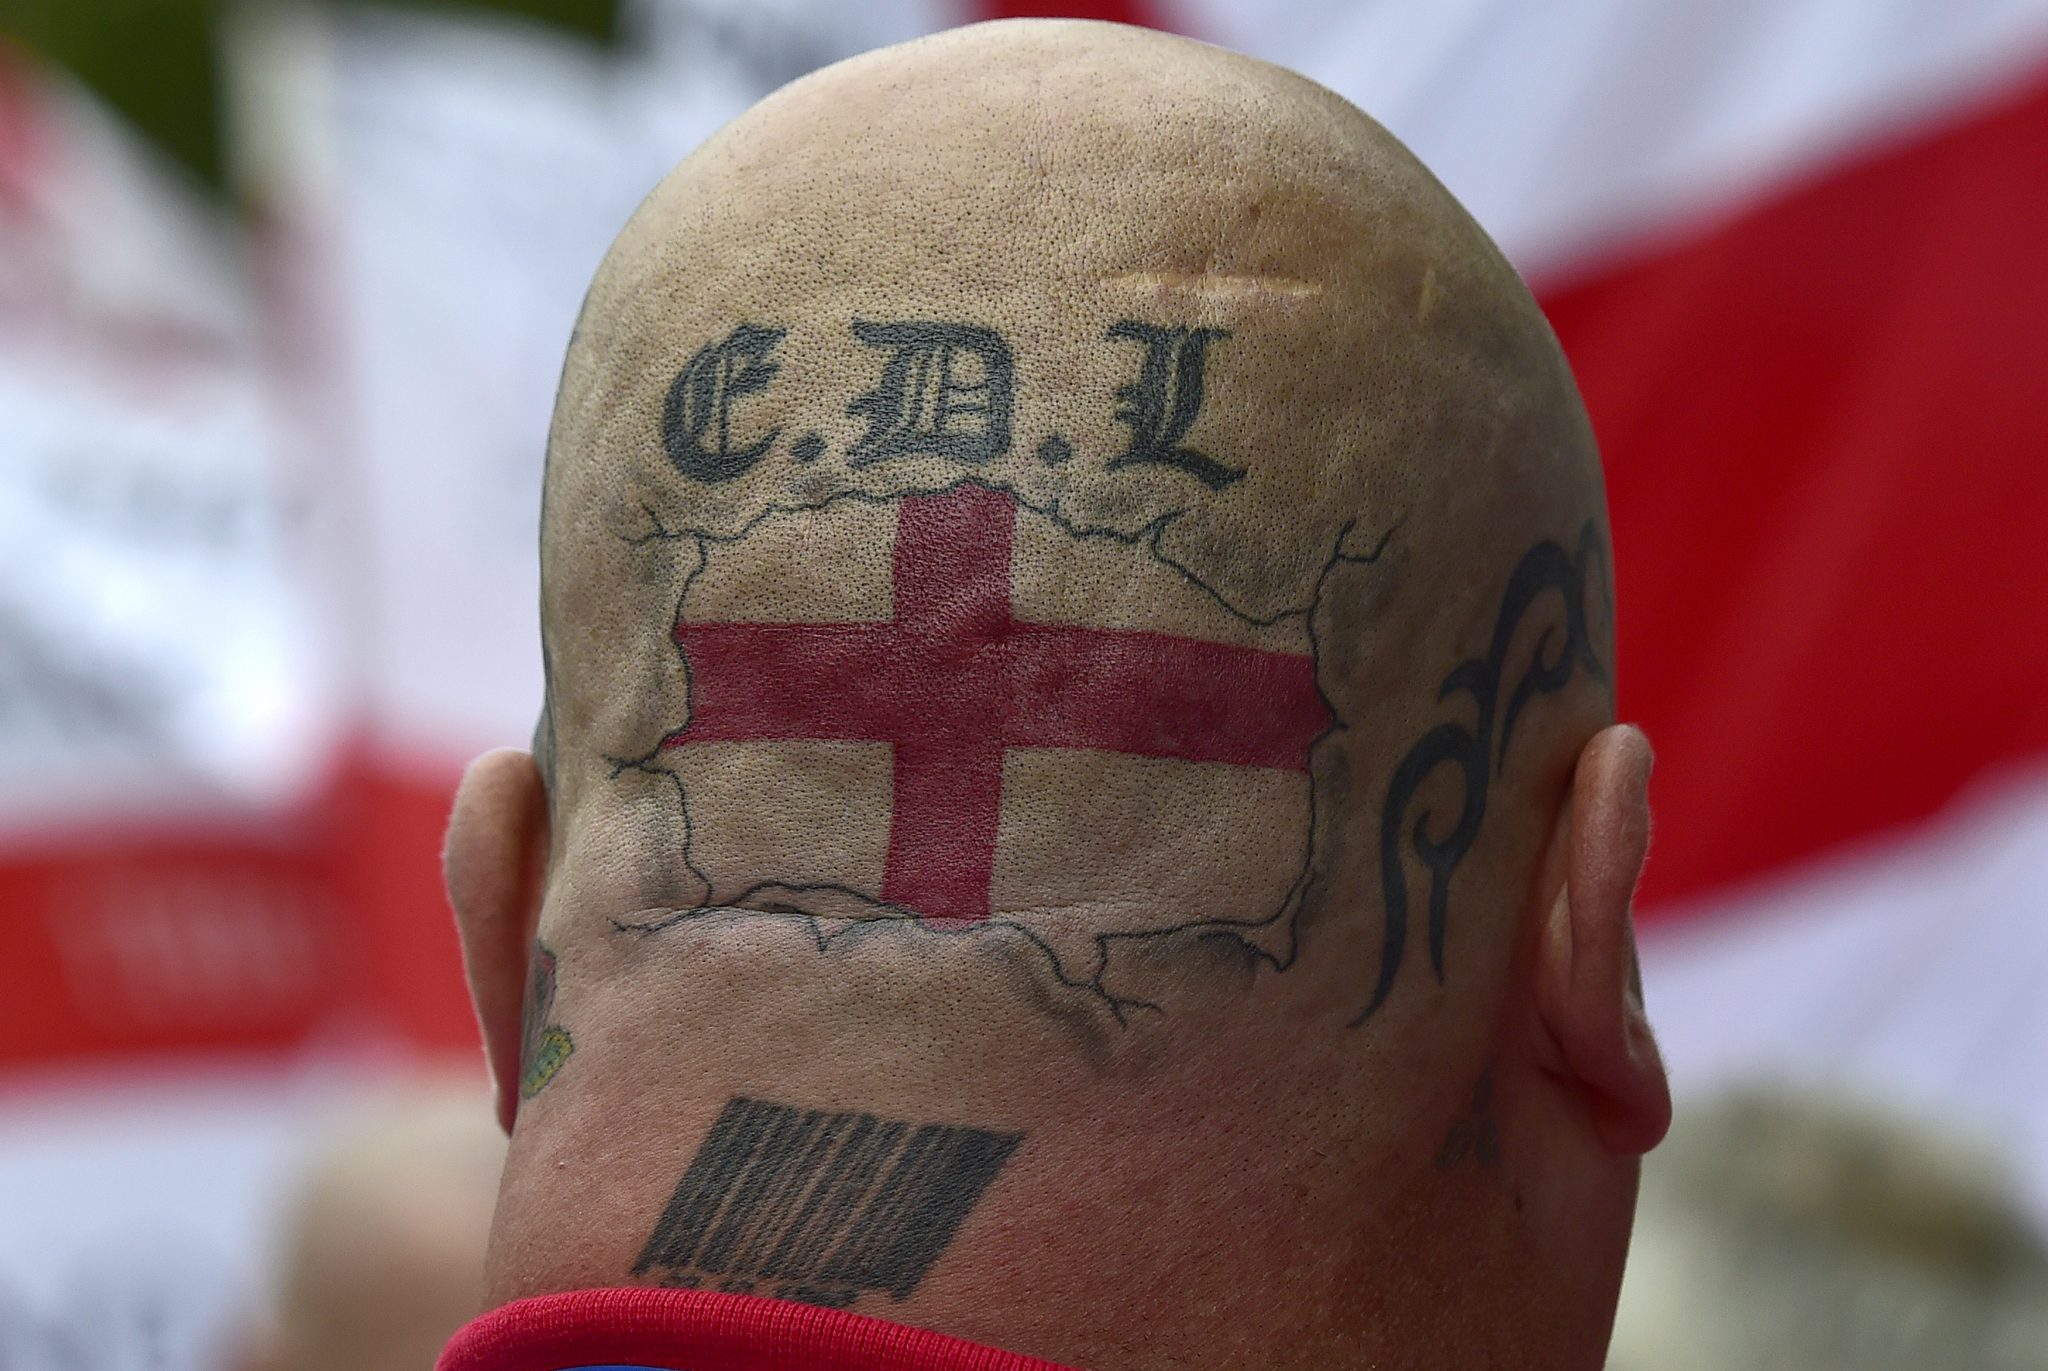 Brexit catalyzes UK's existing far-right as the number of nationalist militants increases: Tattoos are seen on the back of the head of a supporter of the English Defence League (EDL) during a rally outside Downing Street in London September 20, 2014. REUTERS/Toby Melville (BRITAIN - Tags: POLITICS SOCIETY) - LM1EA9K1A9K01